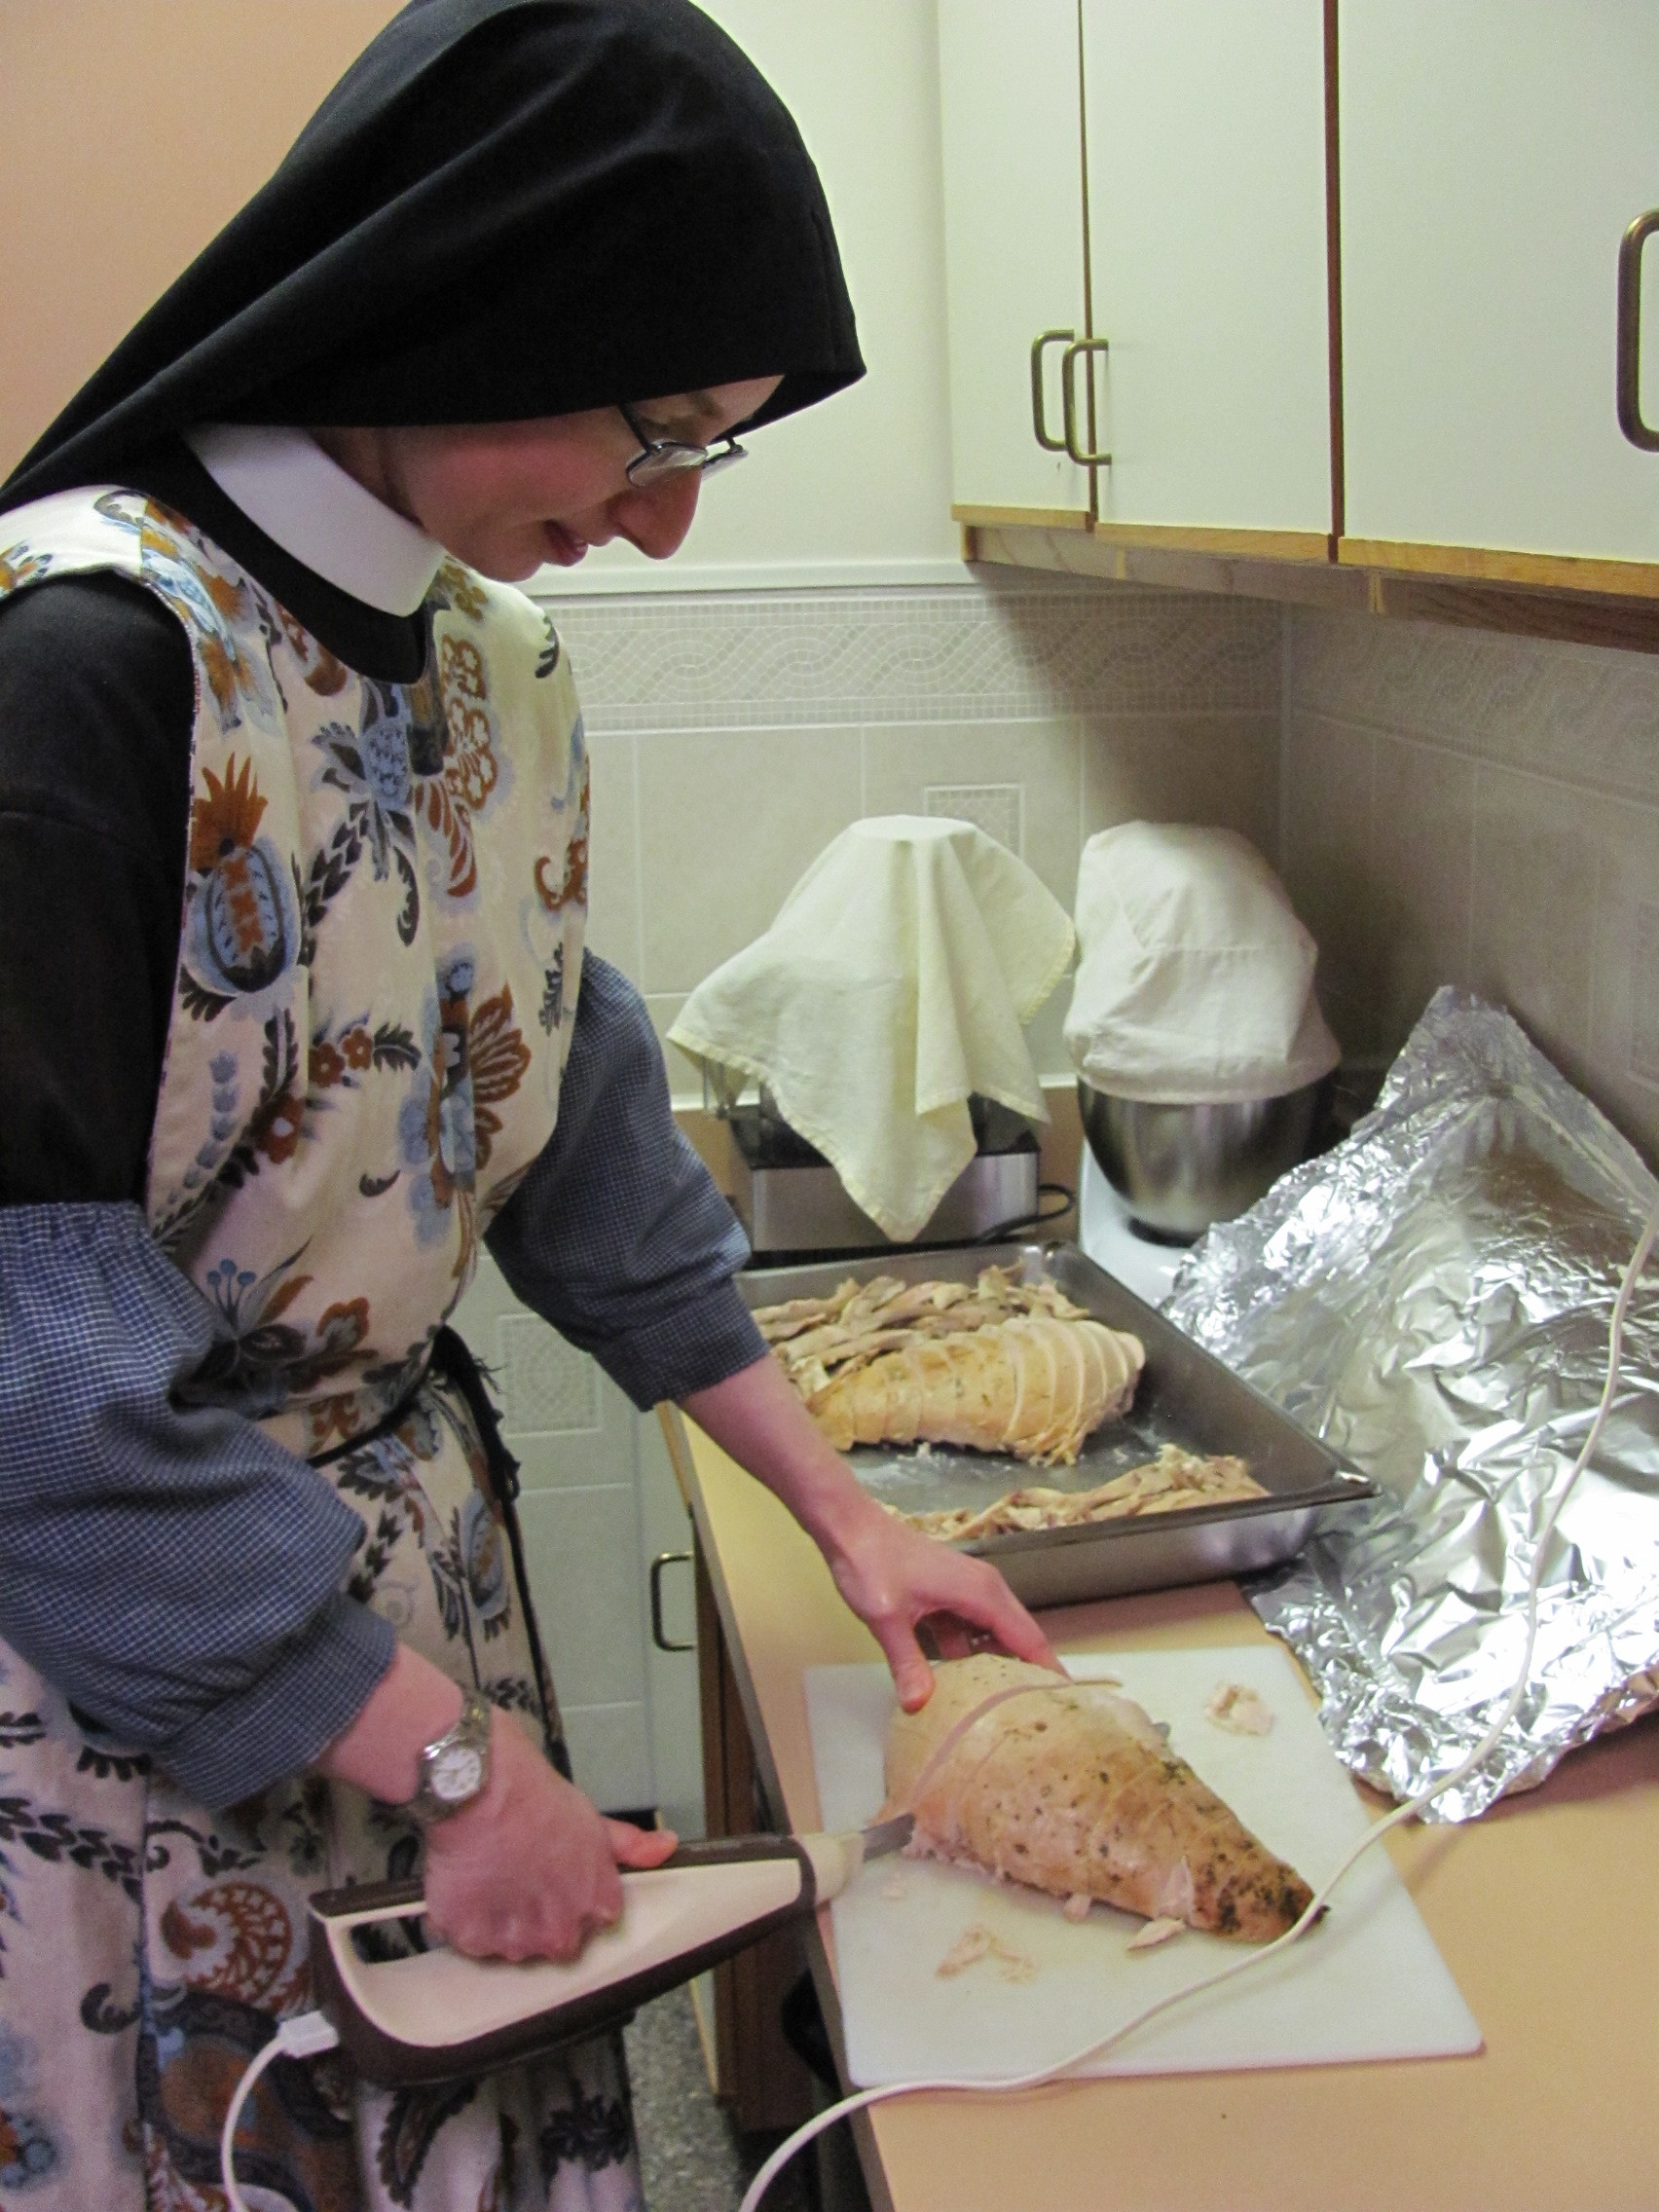  Sr. Cecilia Maria slices the turkey - our first dinner of meat after a long Lent of abstinence! 